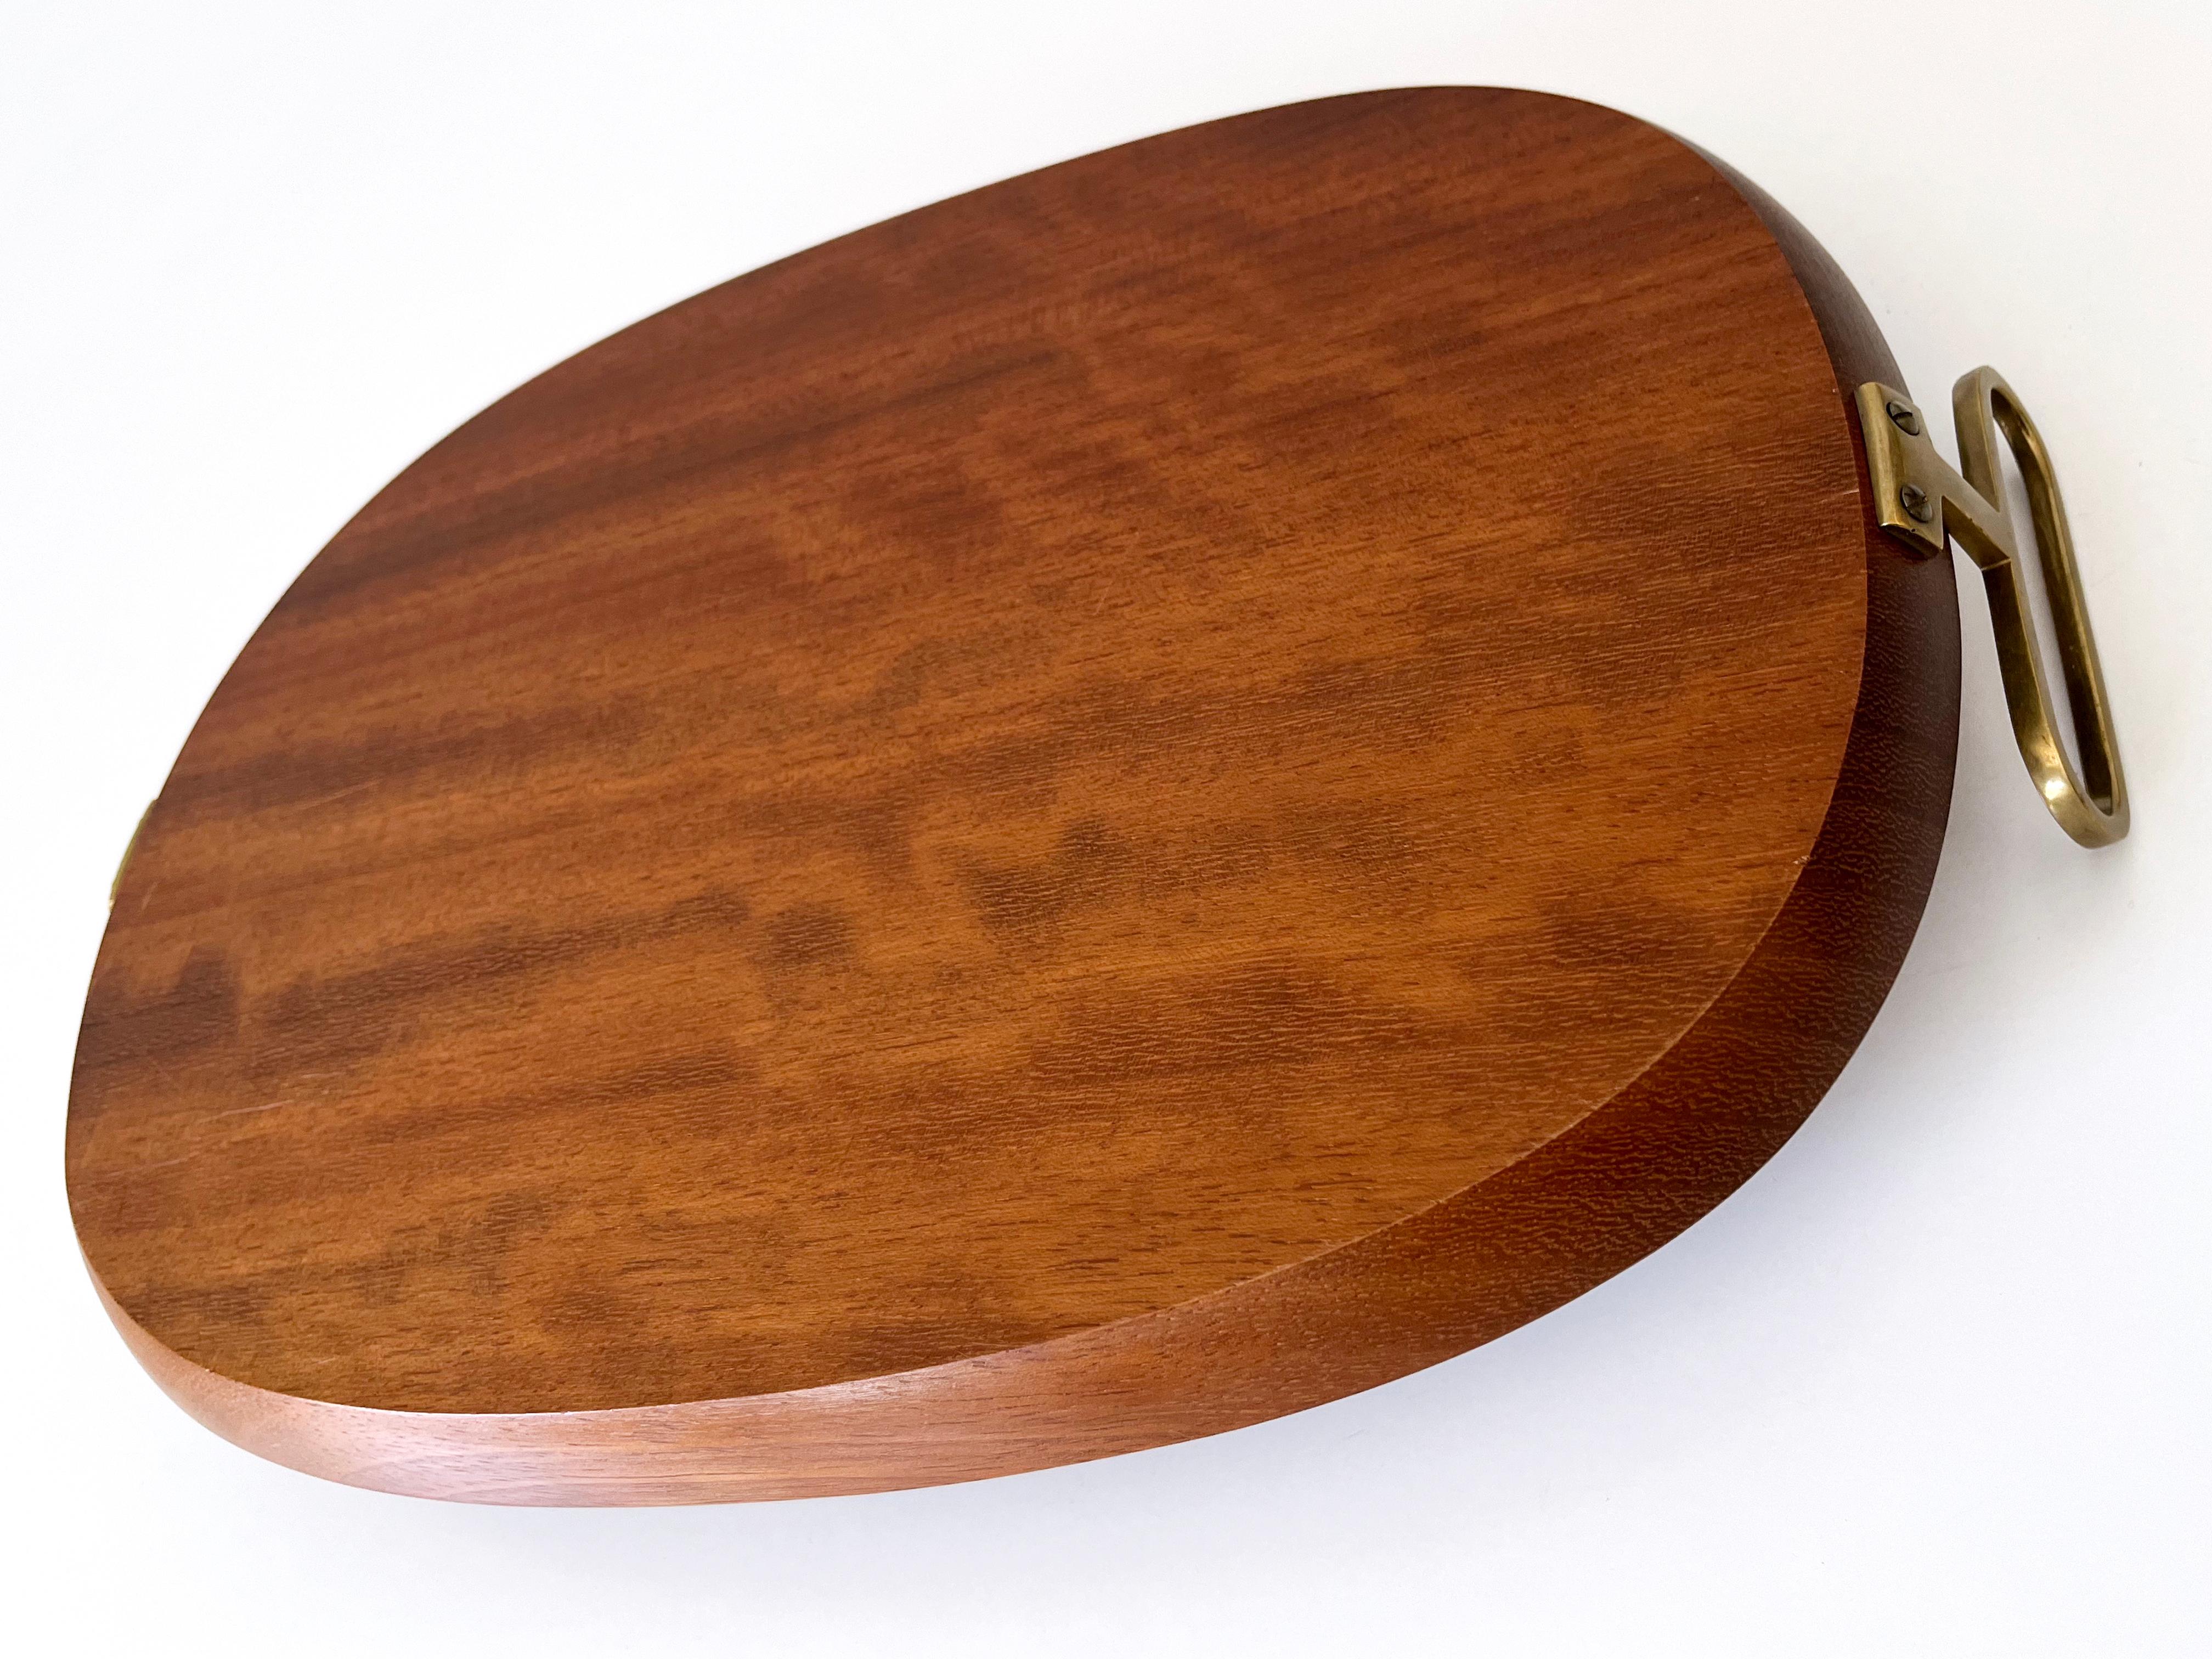 Extremely Rare Mid-Century Modern Teak Serving Tray by Carl Auböck Austria 1950s For Sale 12